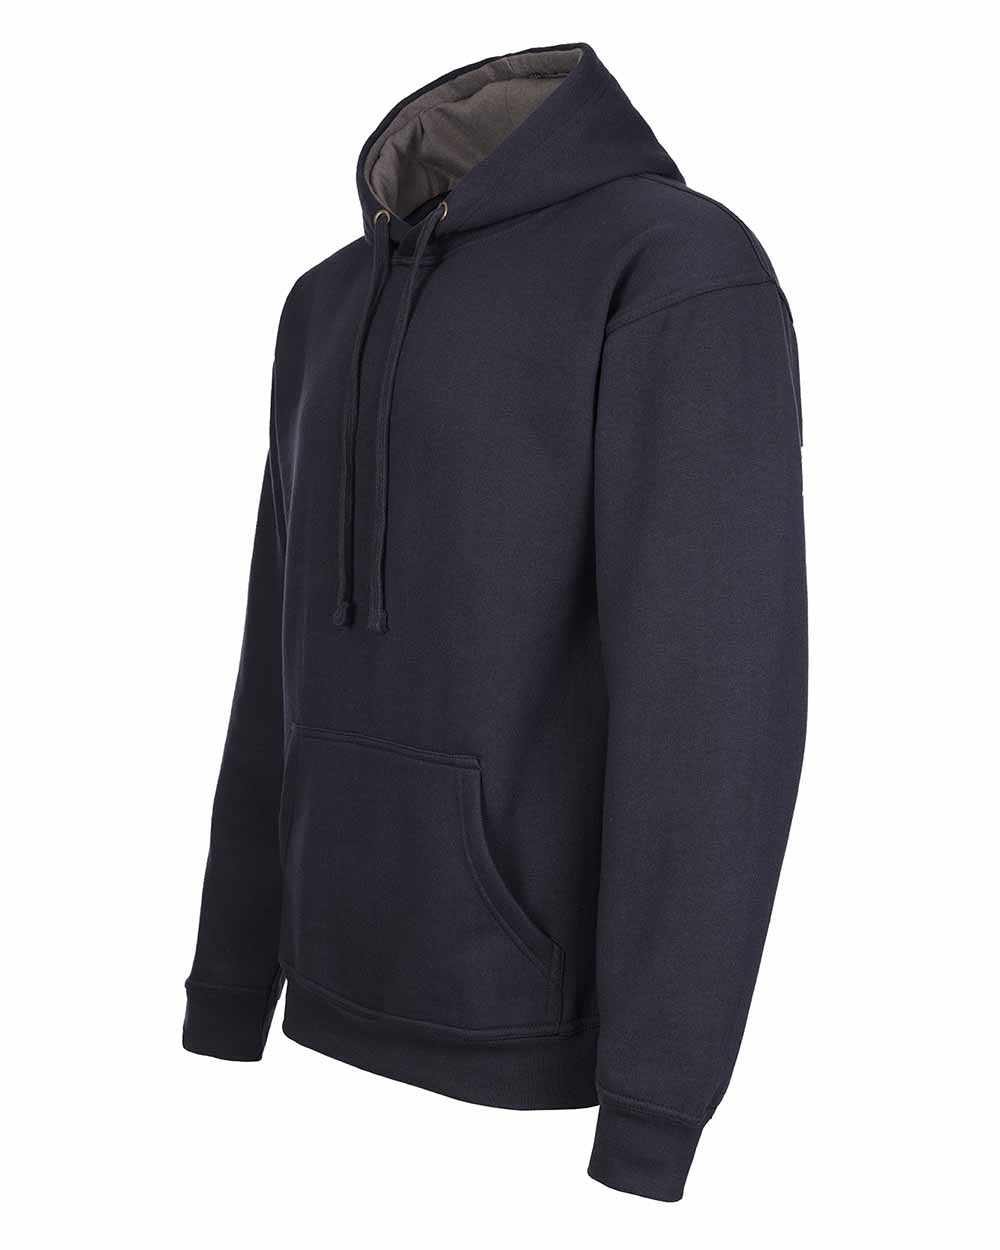 Pouch pockets on TuffStuff Hendon Hoodie in Navy 